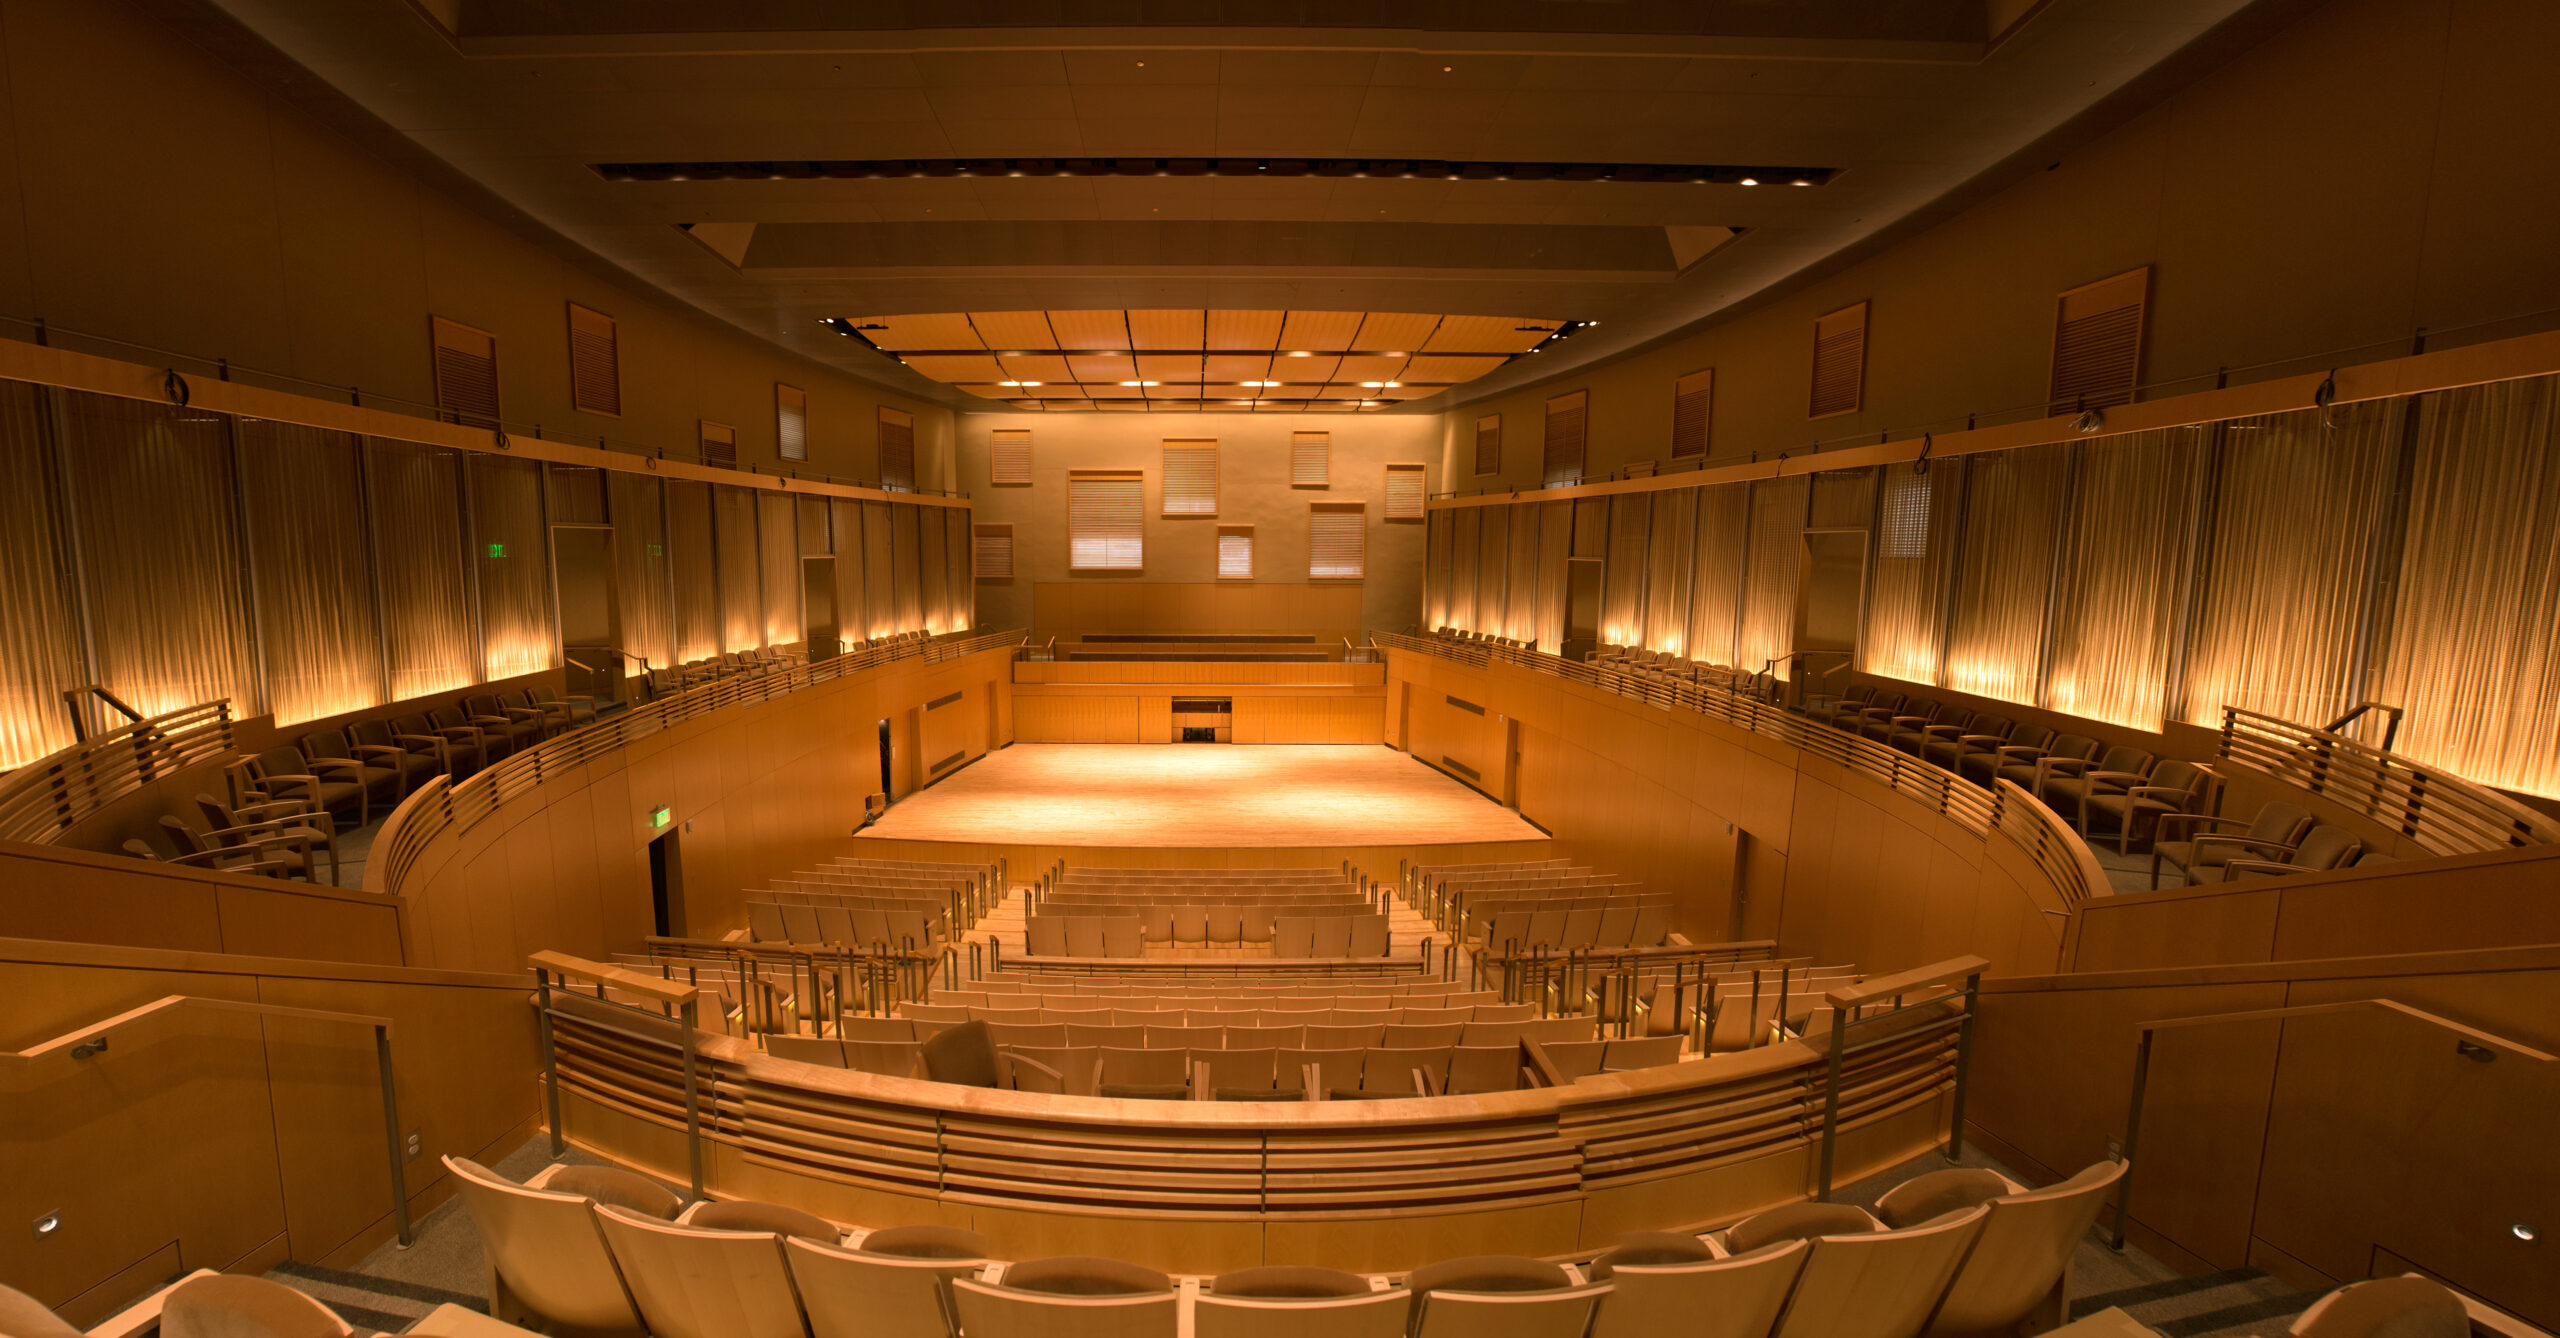 An image of a concert hall looking toward the stage